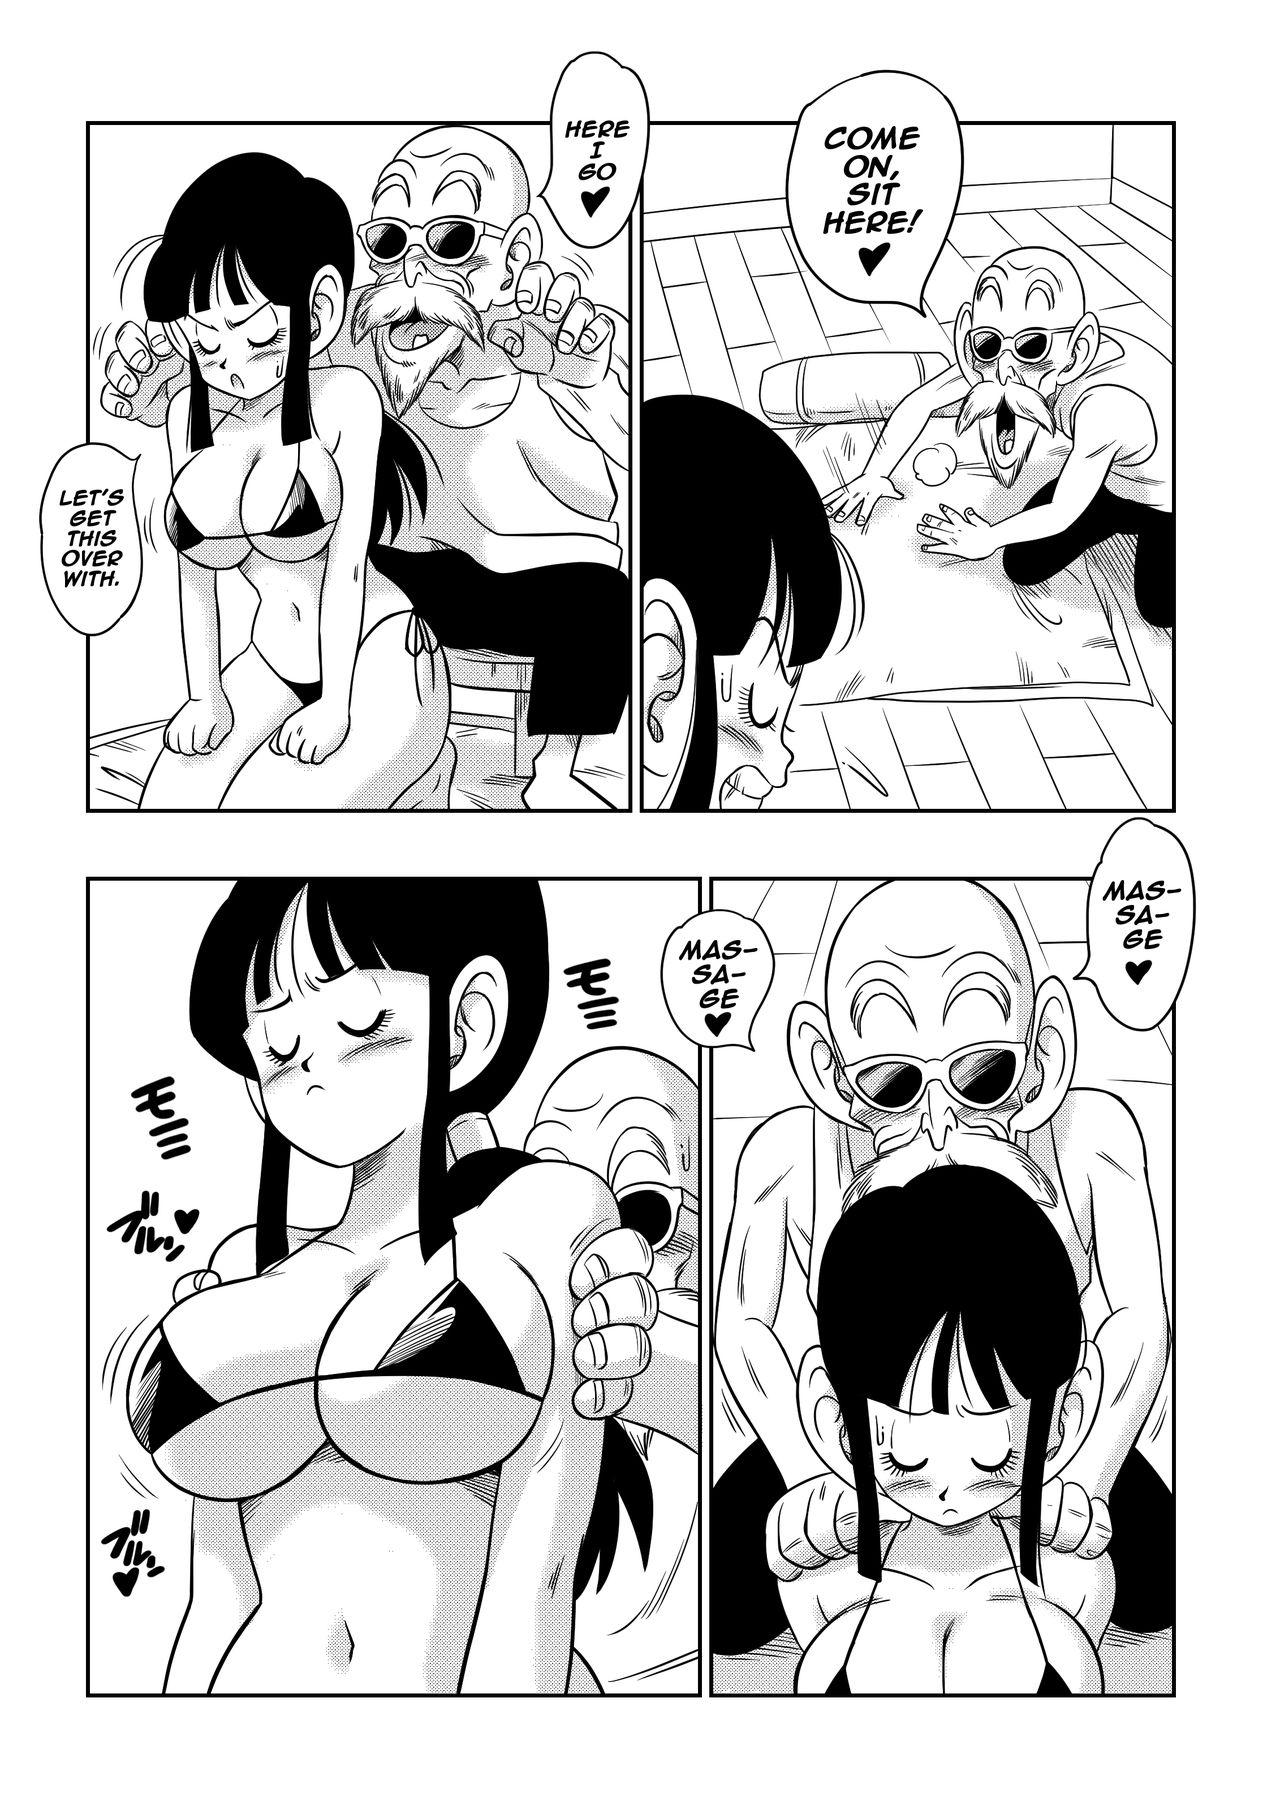 Off "An Ancient Tradition" - Young Wife is Harassed! - Dragon ball z Clothed - Page 8